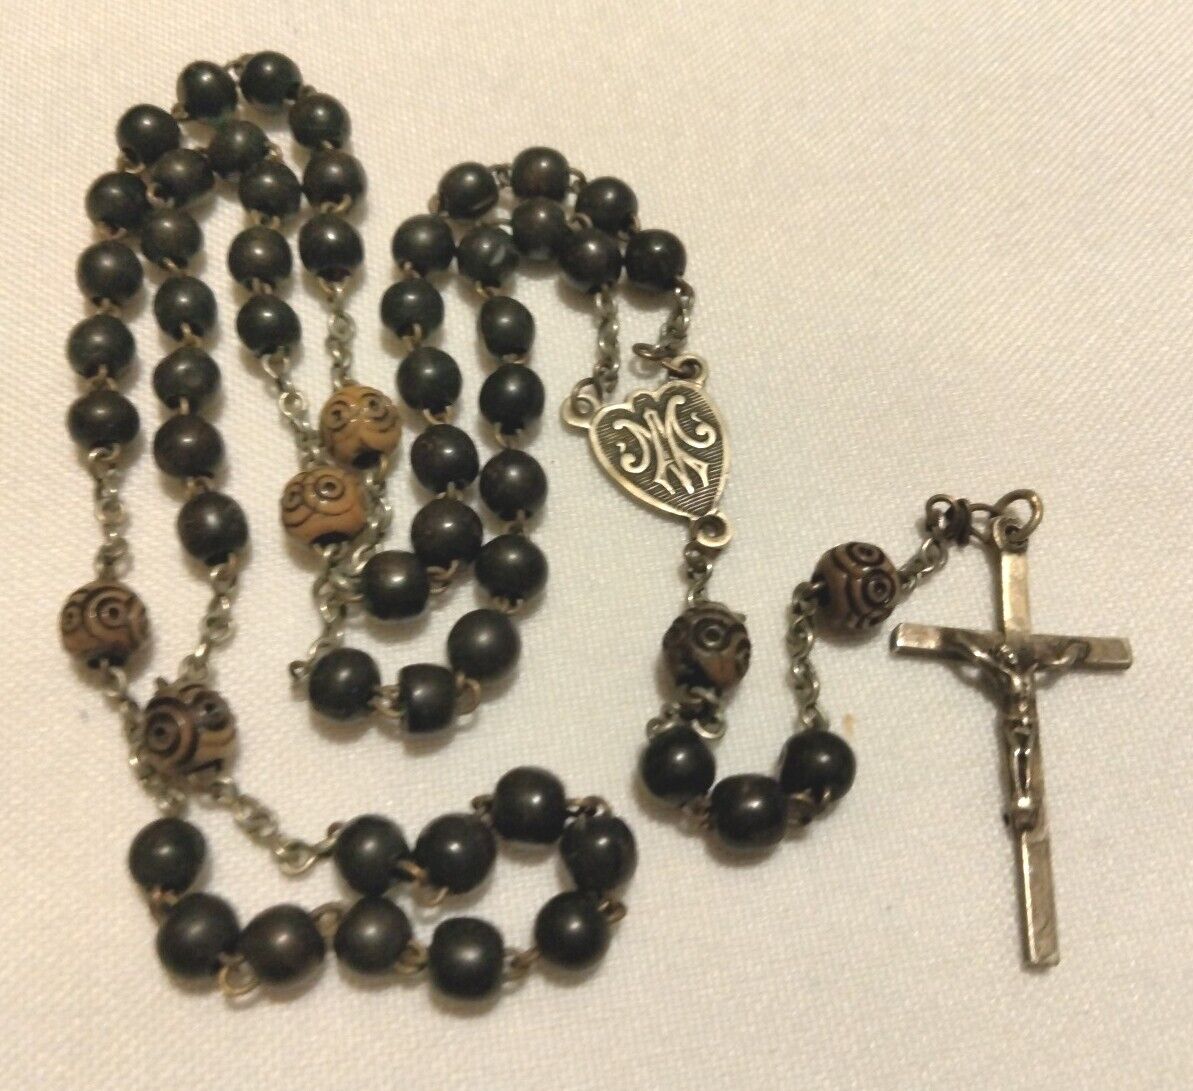 Exceptional Wood Bead Rosary Carved Our Father\'s Dates To The Mid 1800\'s